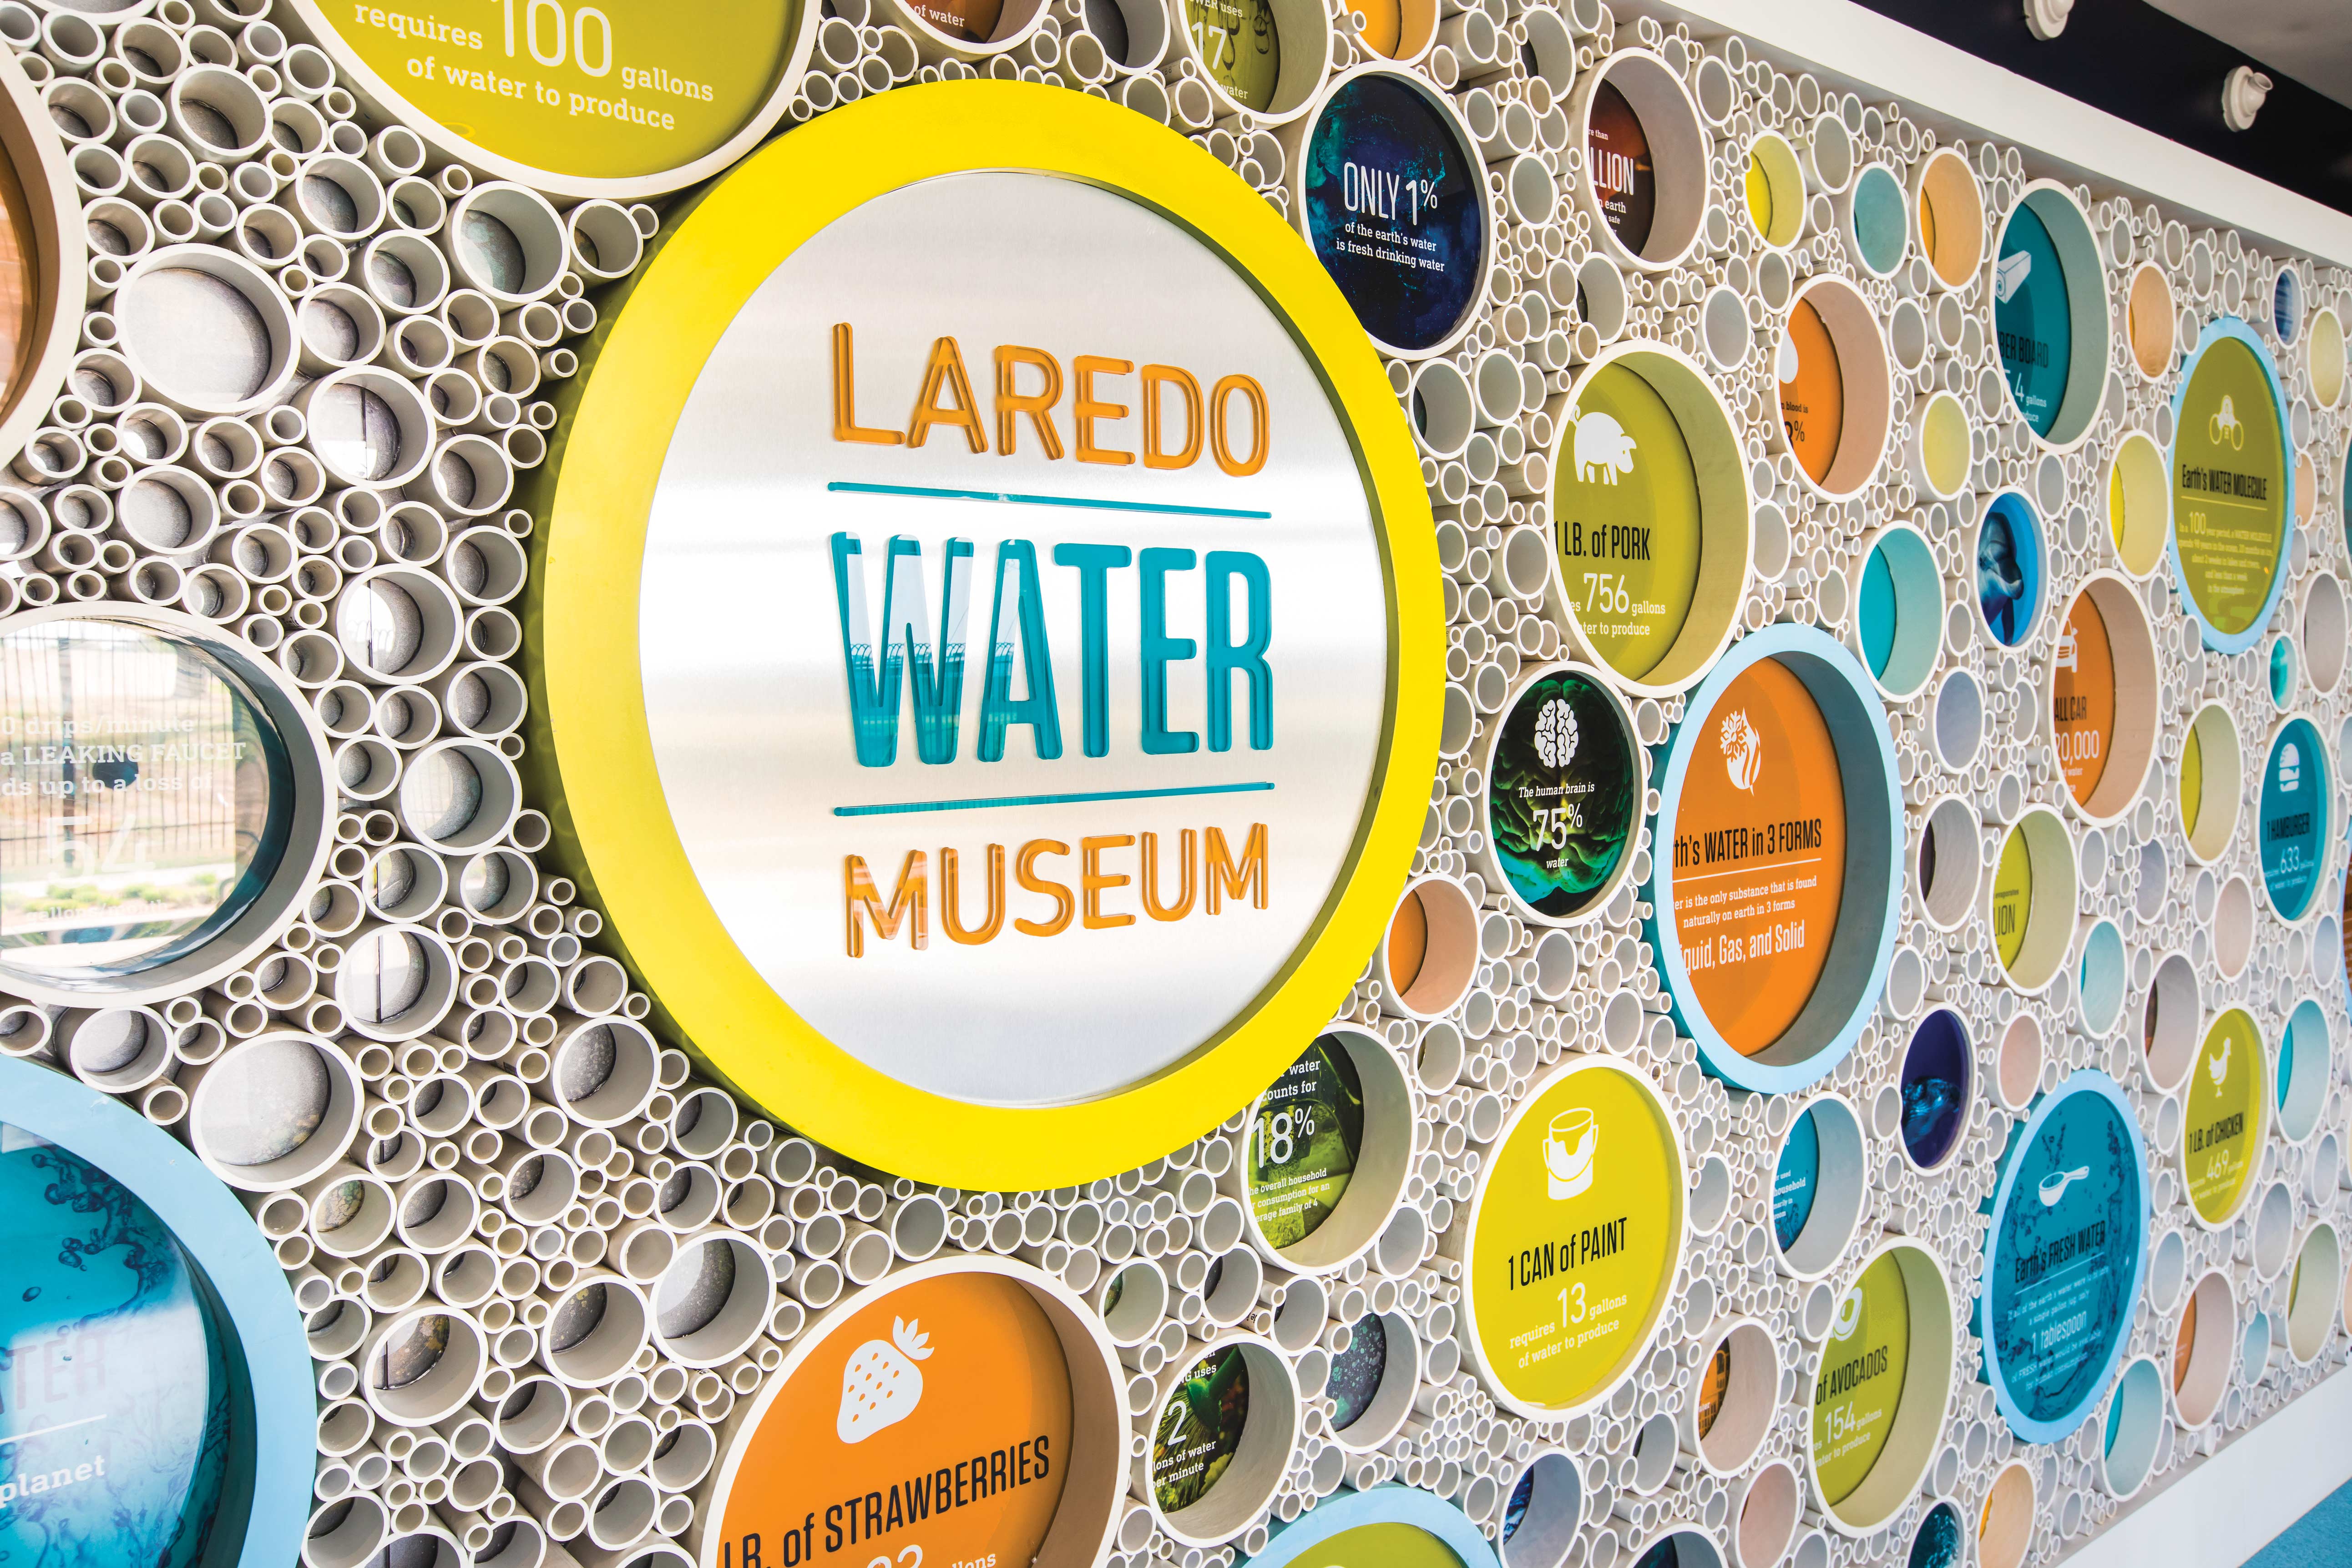 Inside sign at the Laredo Water Museum